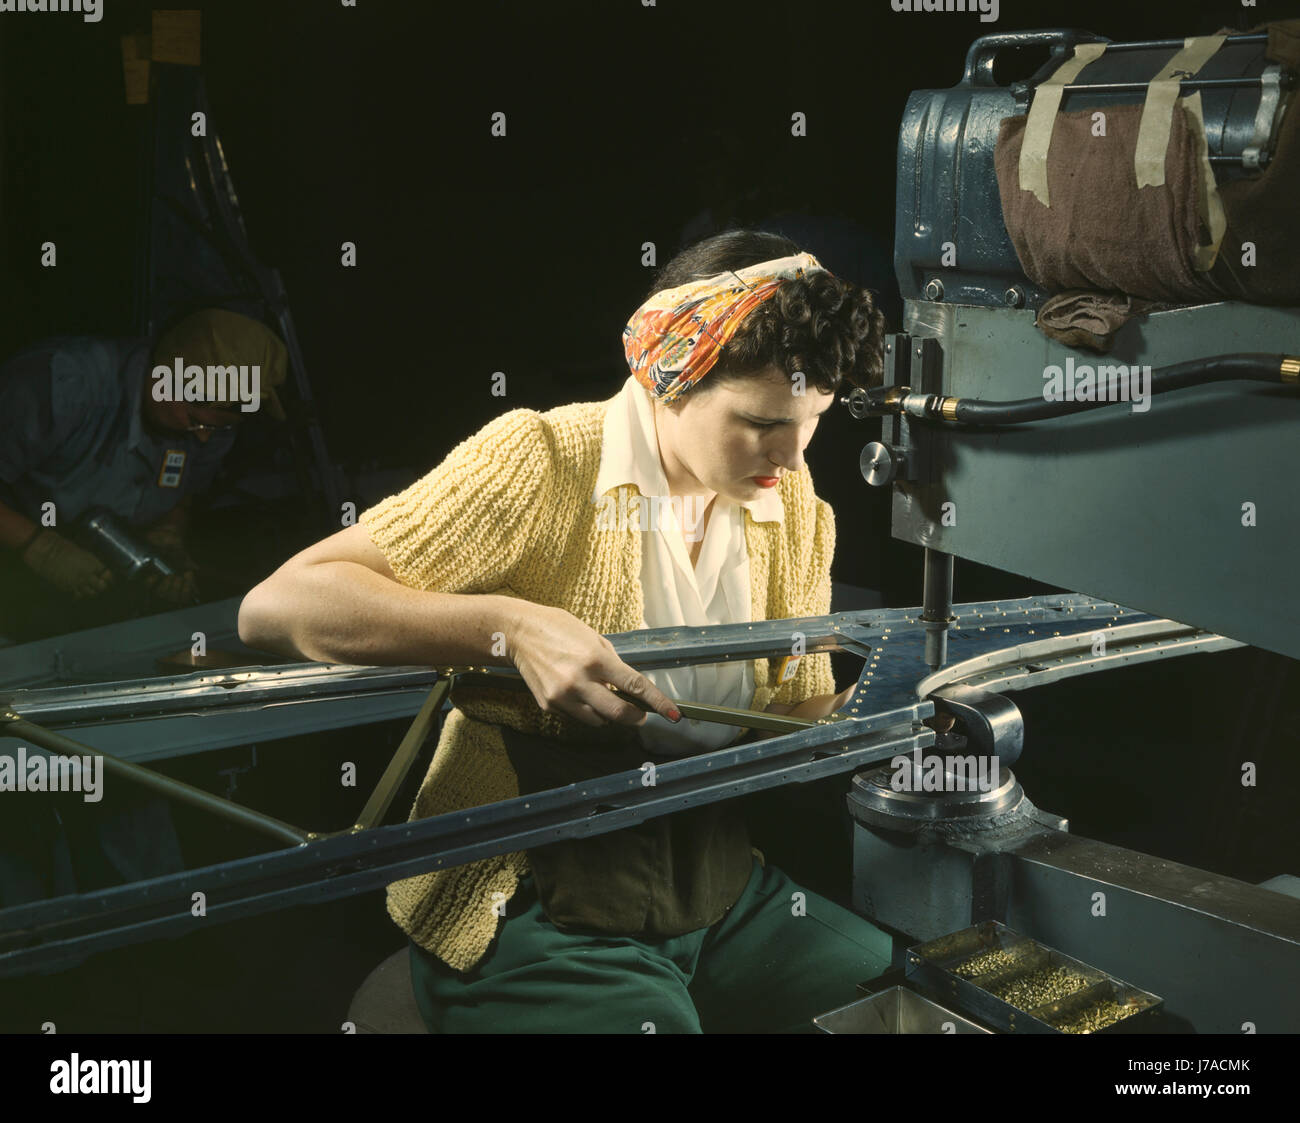 A woman riveting machine operator at an aircraft assembly plant during WWII, 1942. Stock Photo